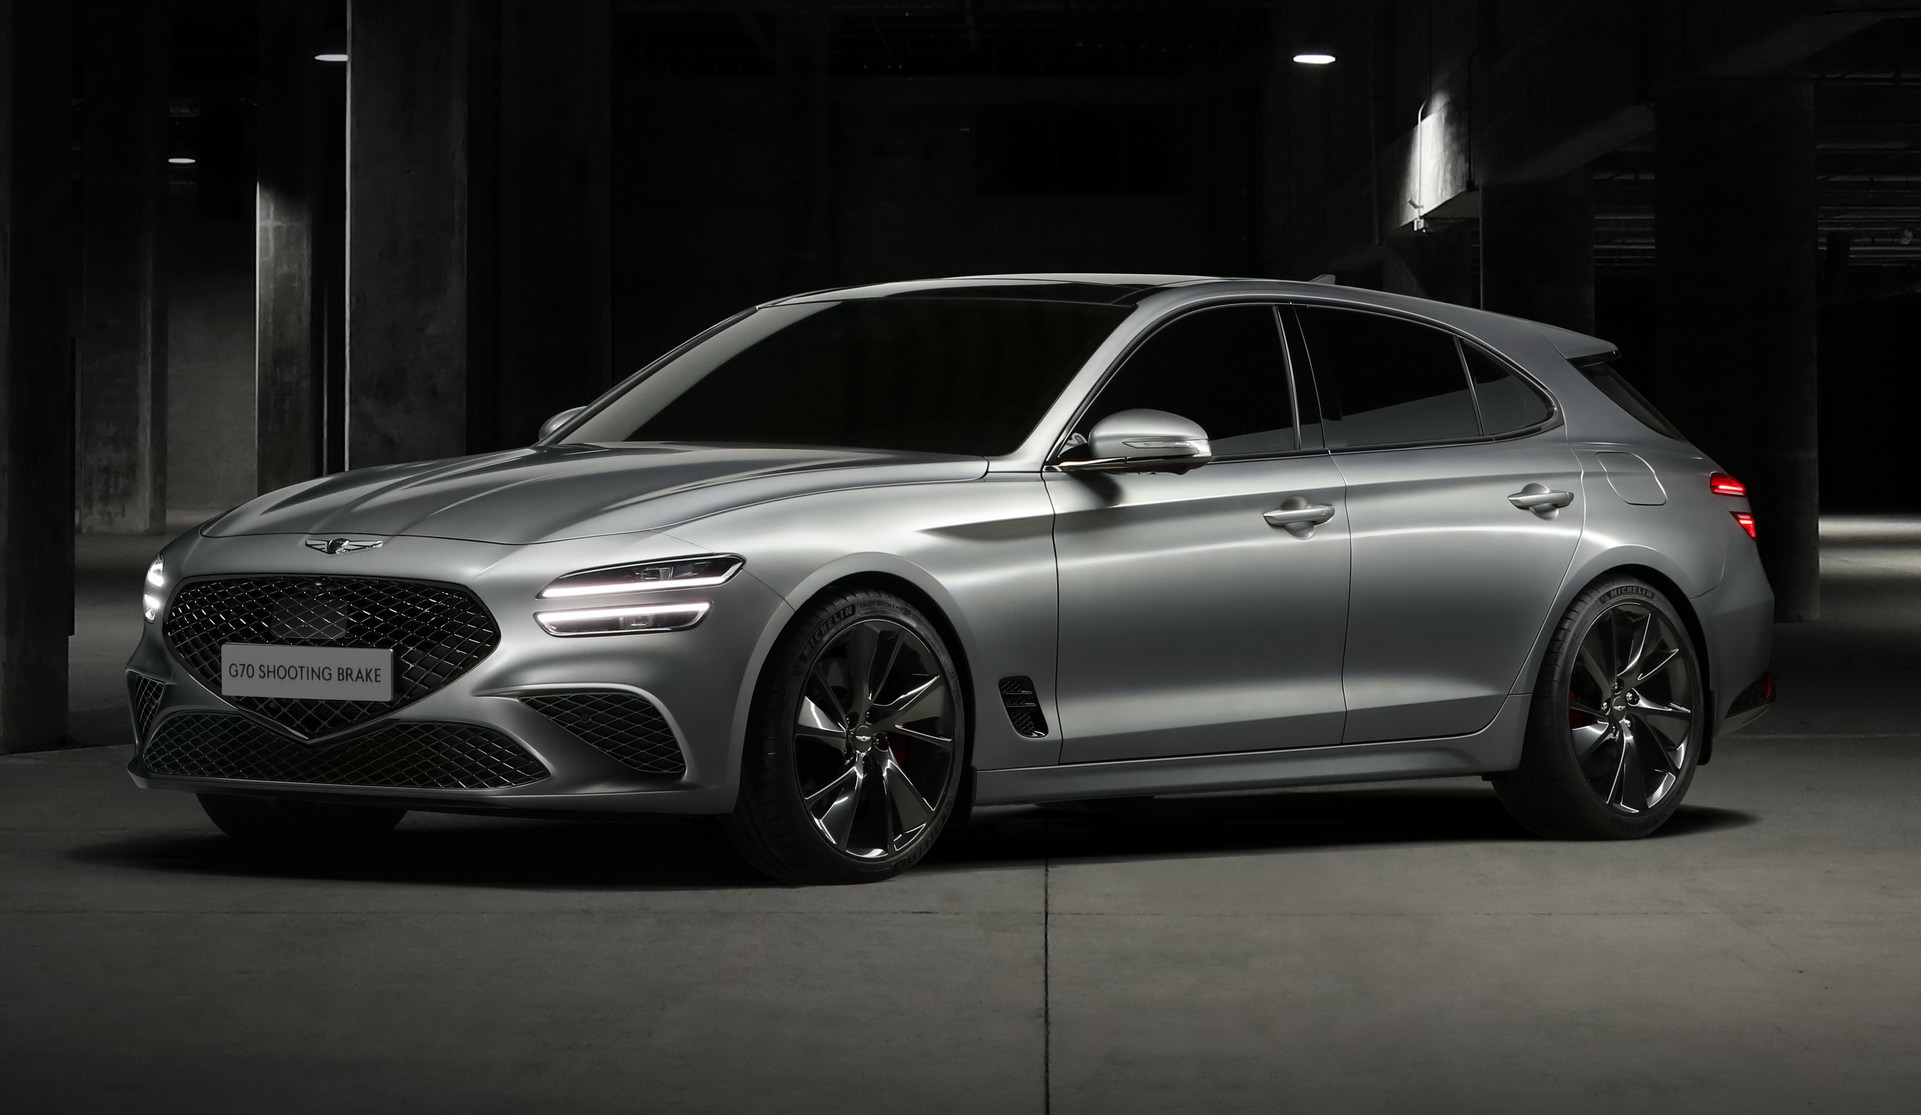 New Genesis G70 Shooting Brake Is Brand s First Ever Wagon And It s Made For Europe Carscoops